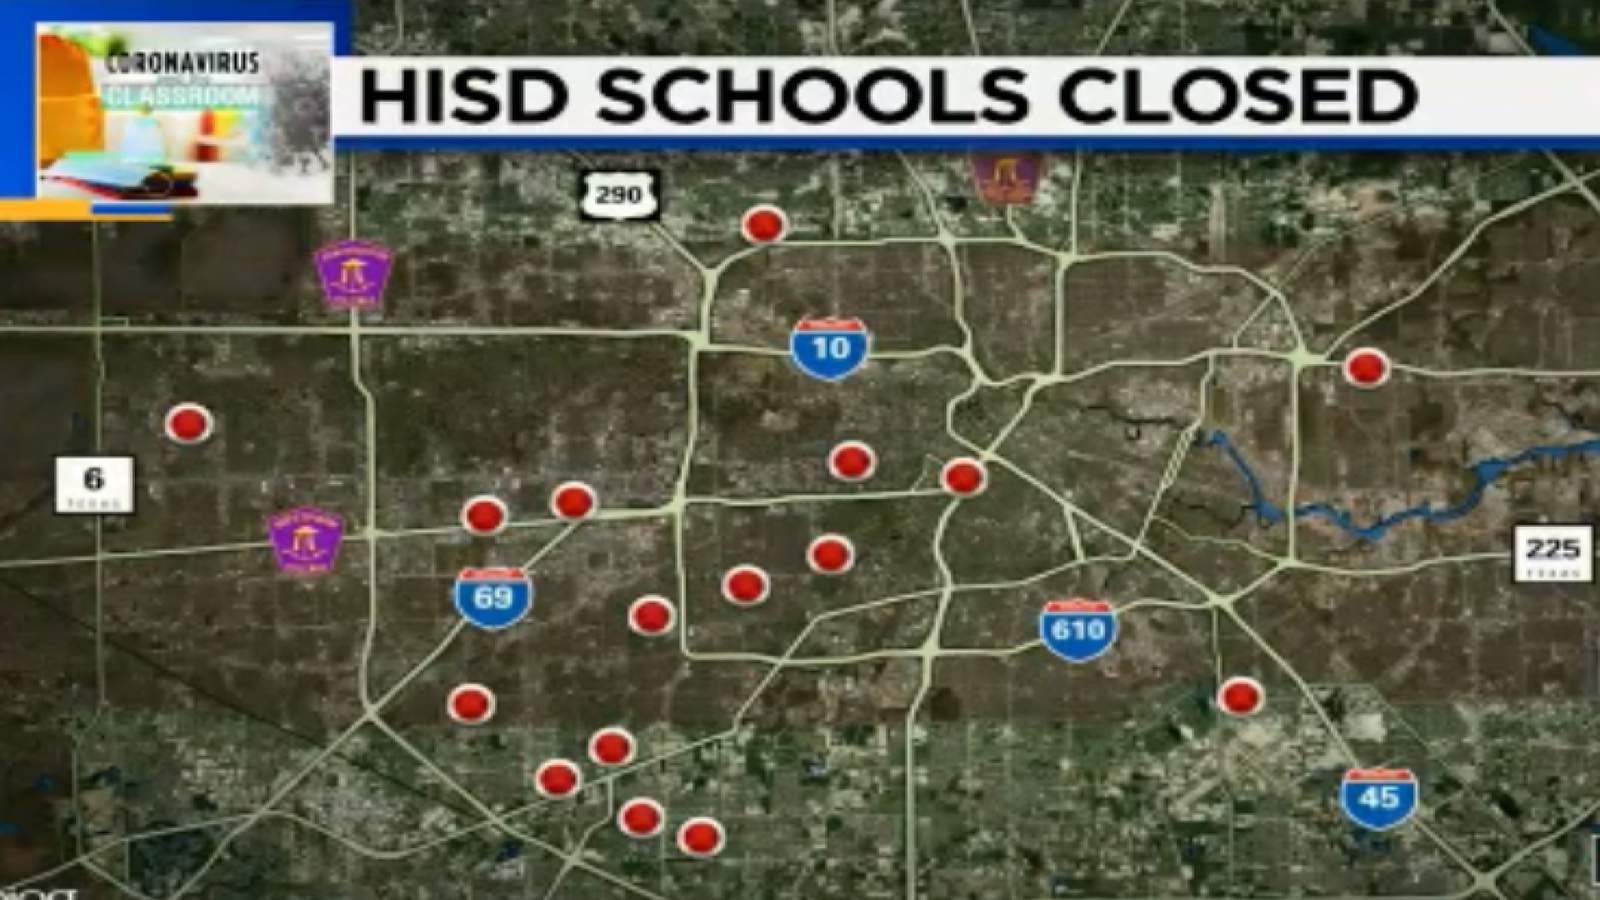 Bellaire High School, other HISD schools close campuses Tuesday after positive COVID-19 cases